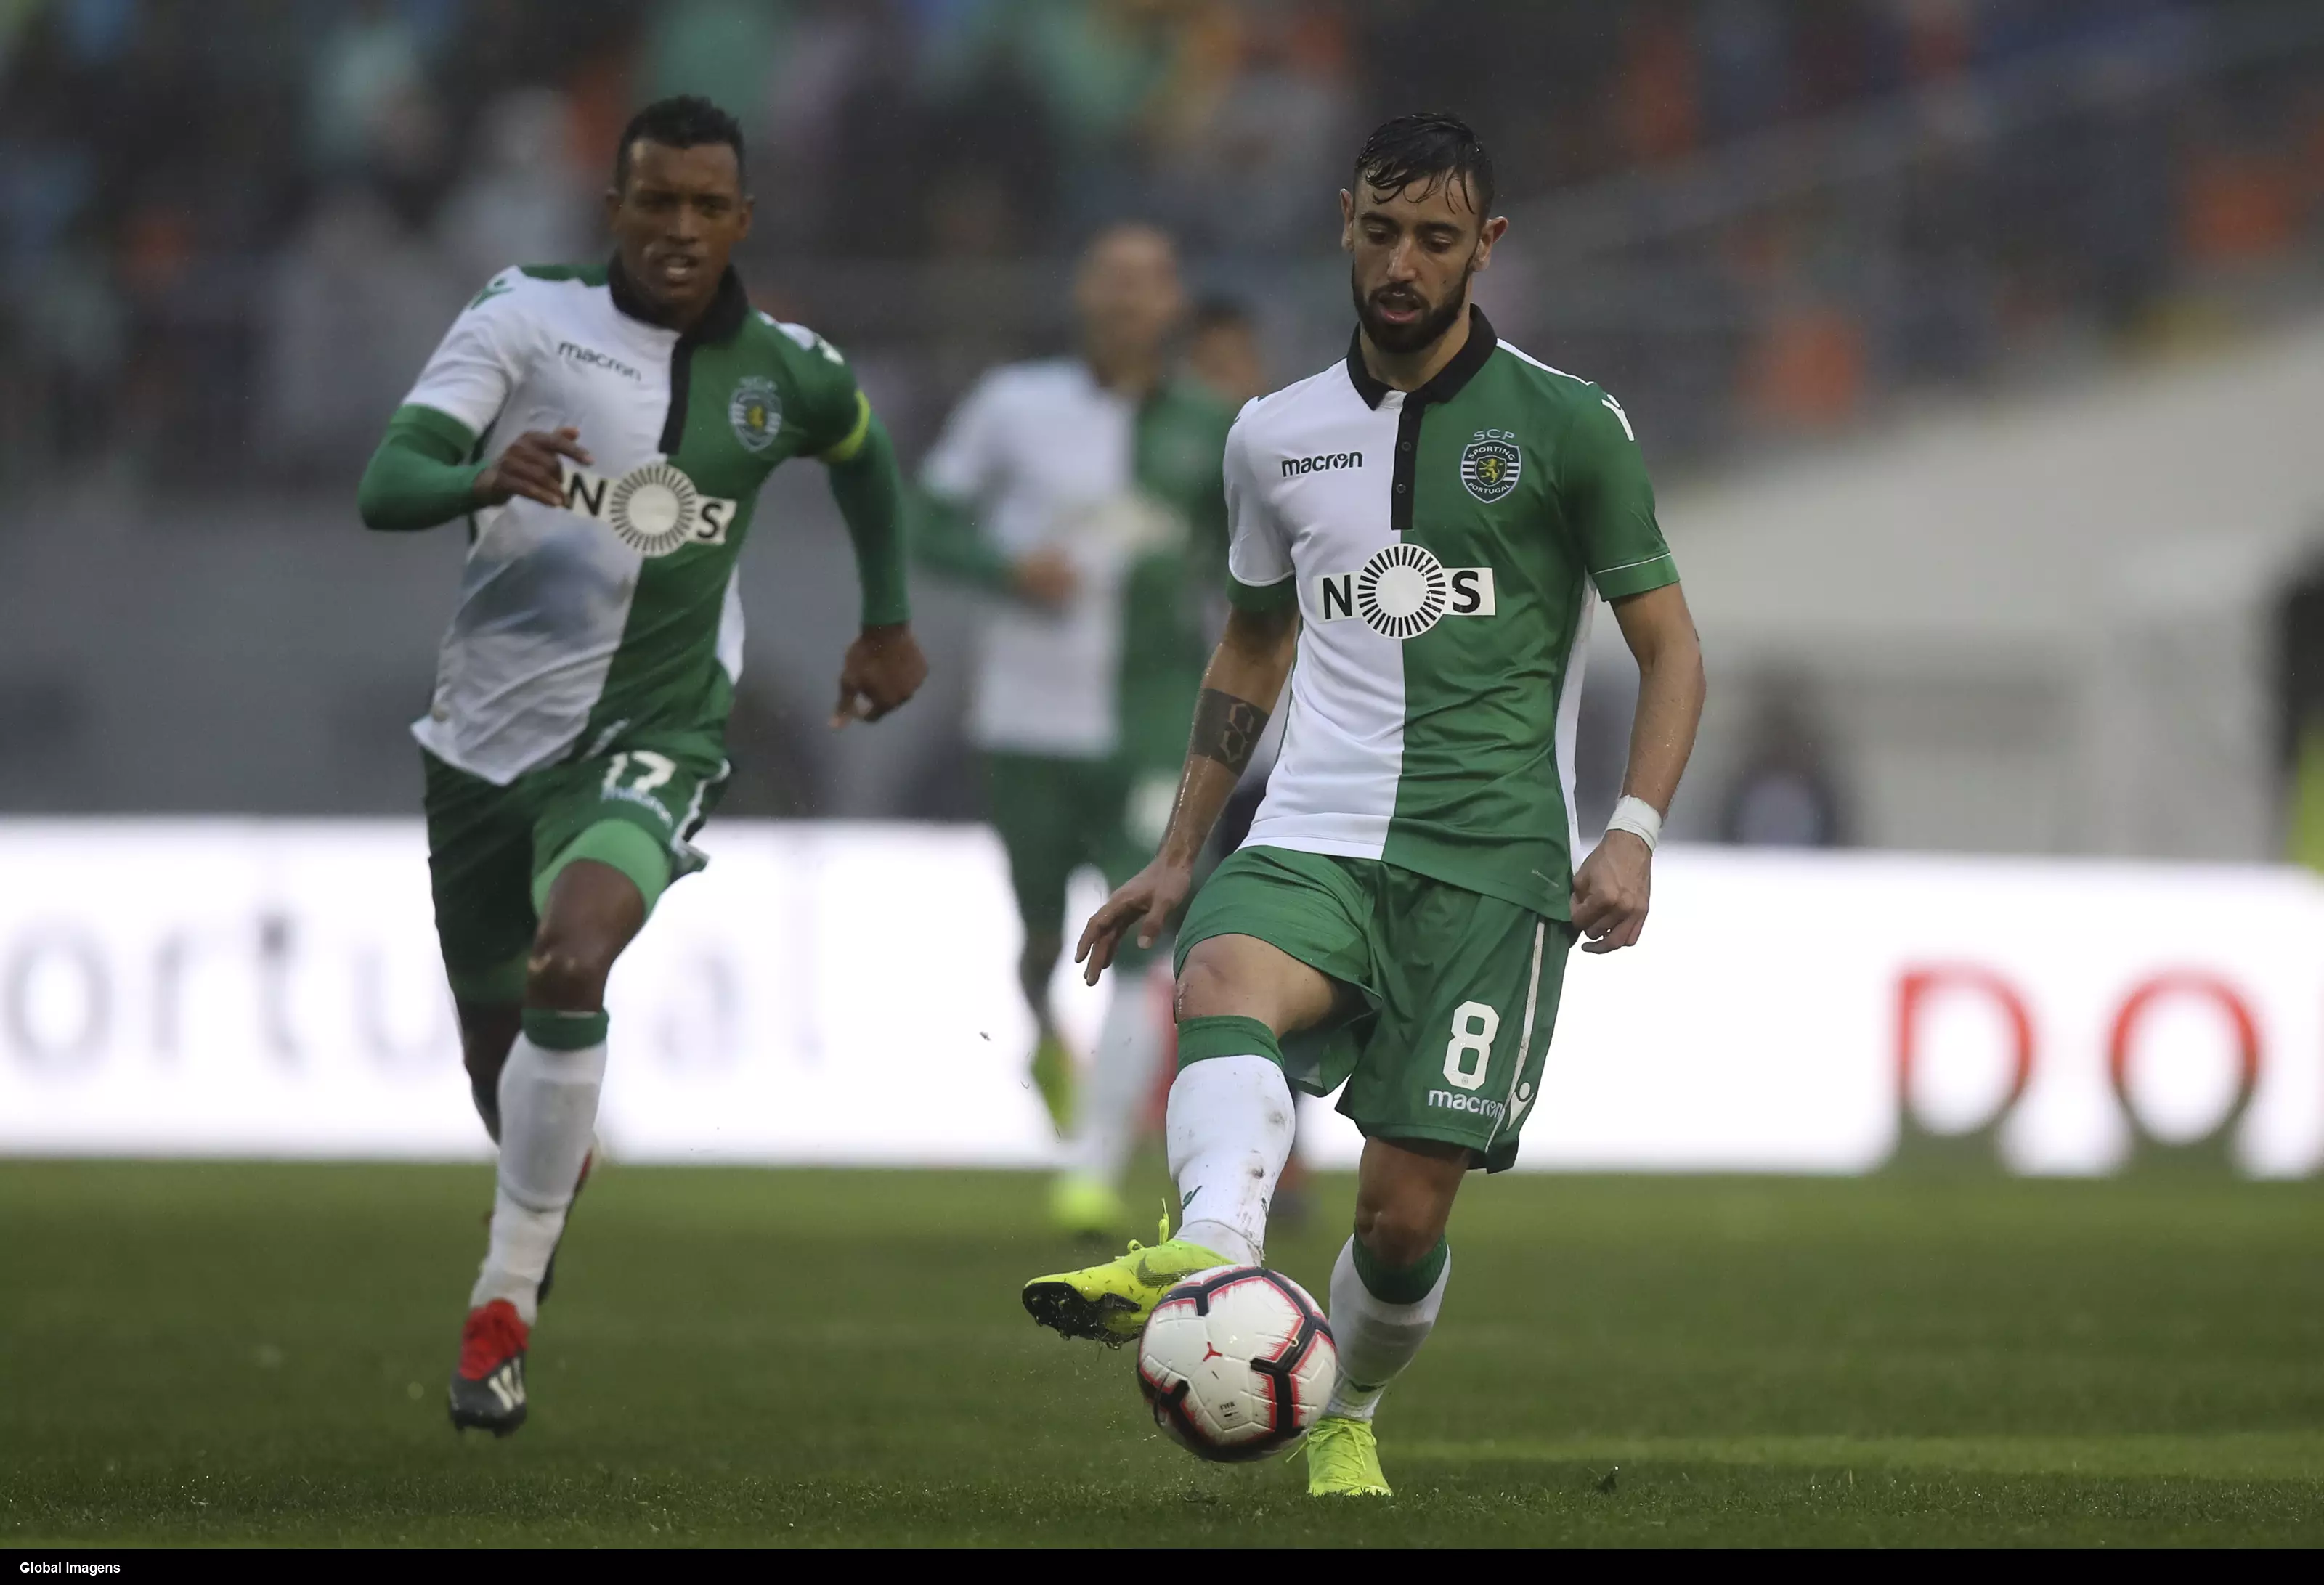 Nani and Fernandes played together at Sporting. Image: PA Images